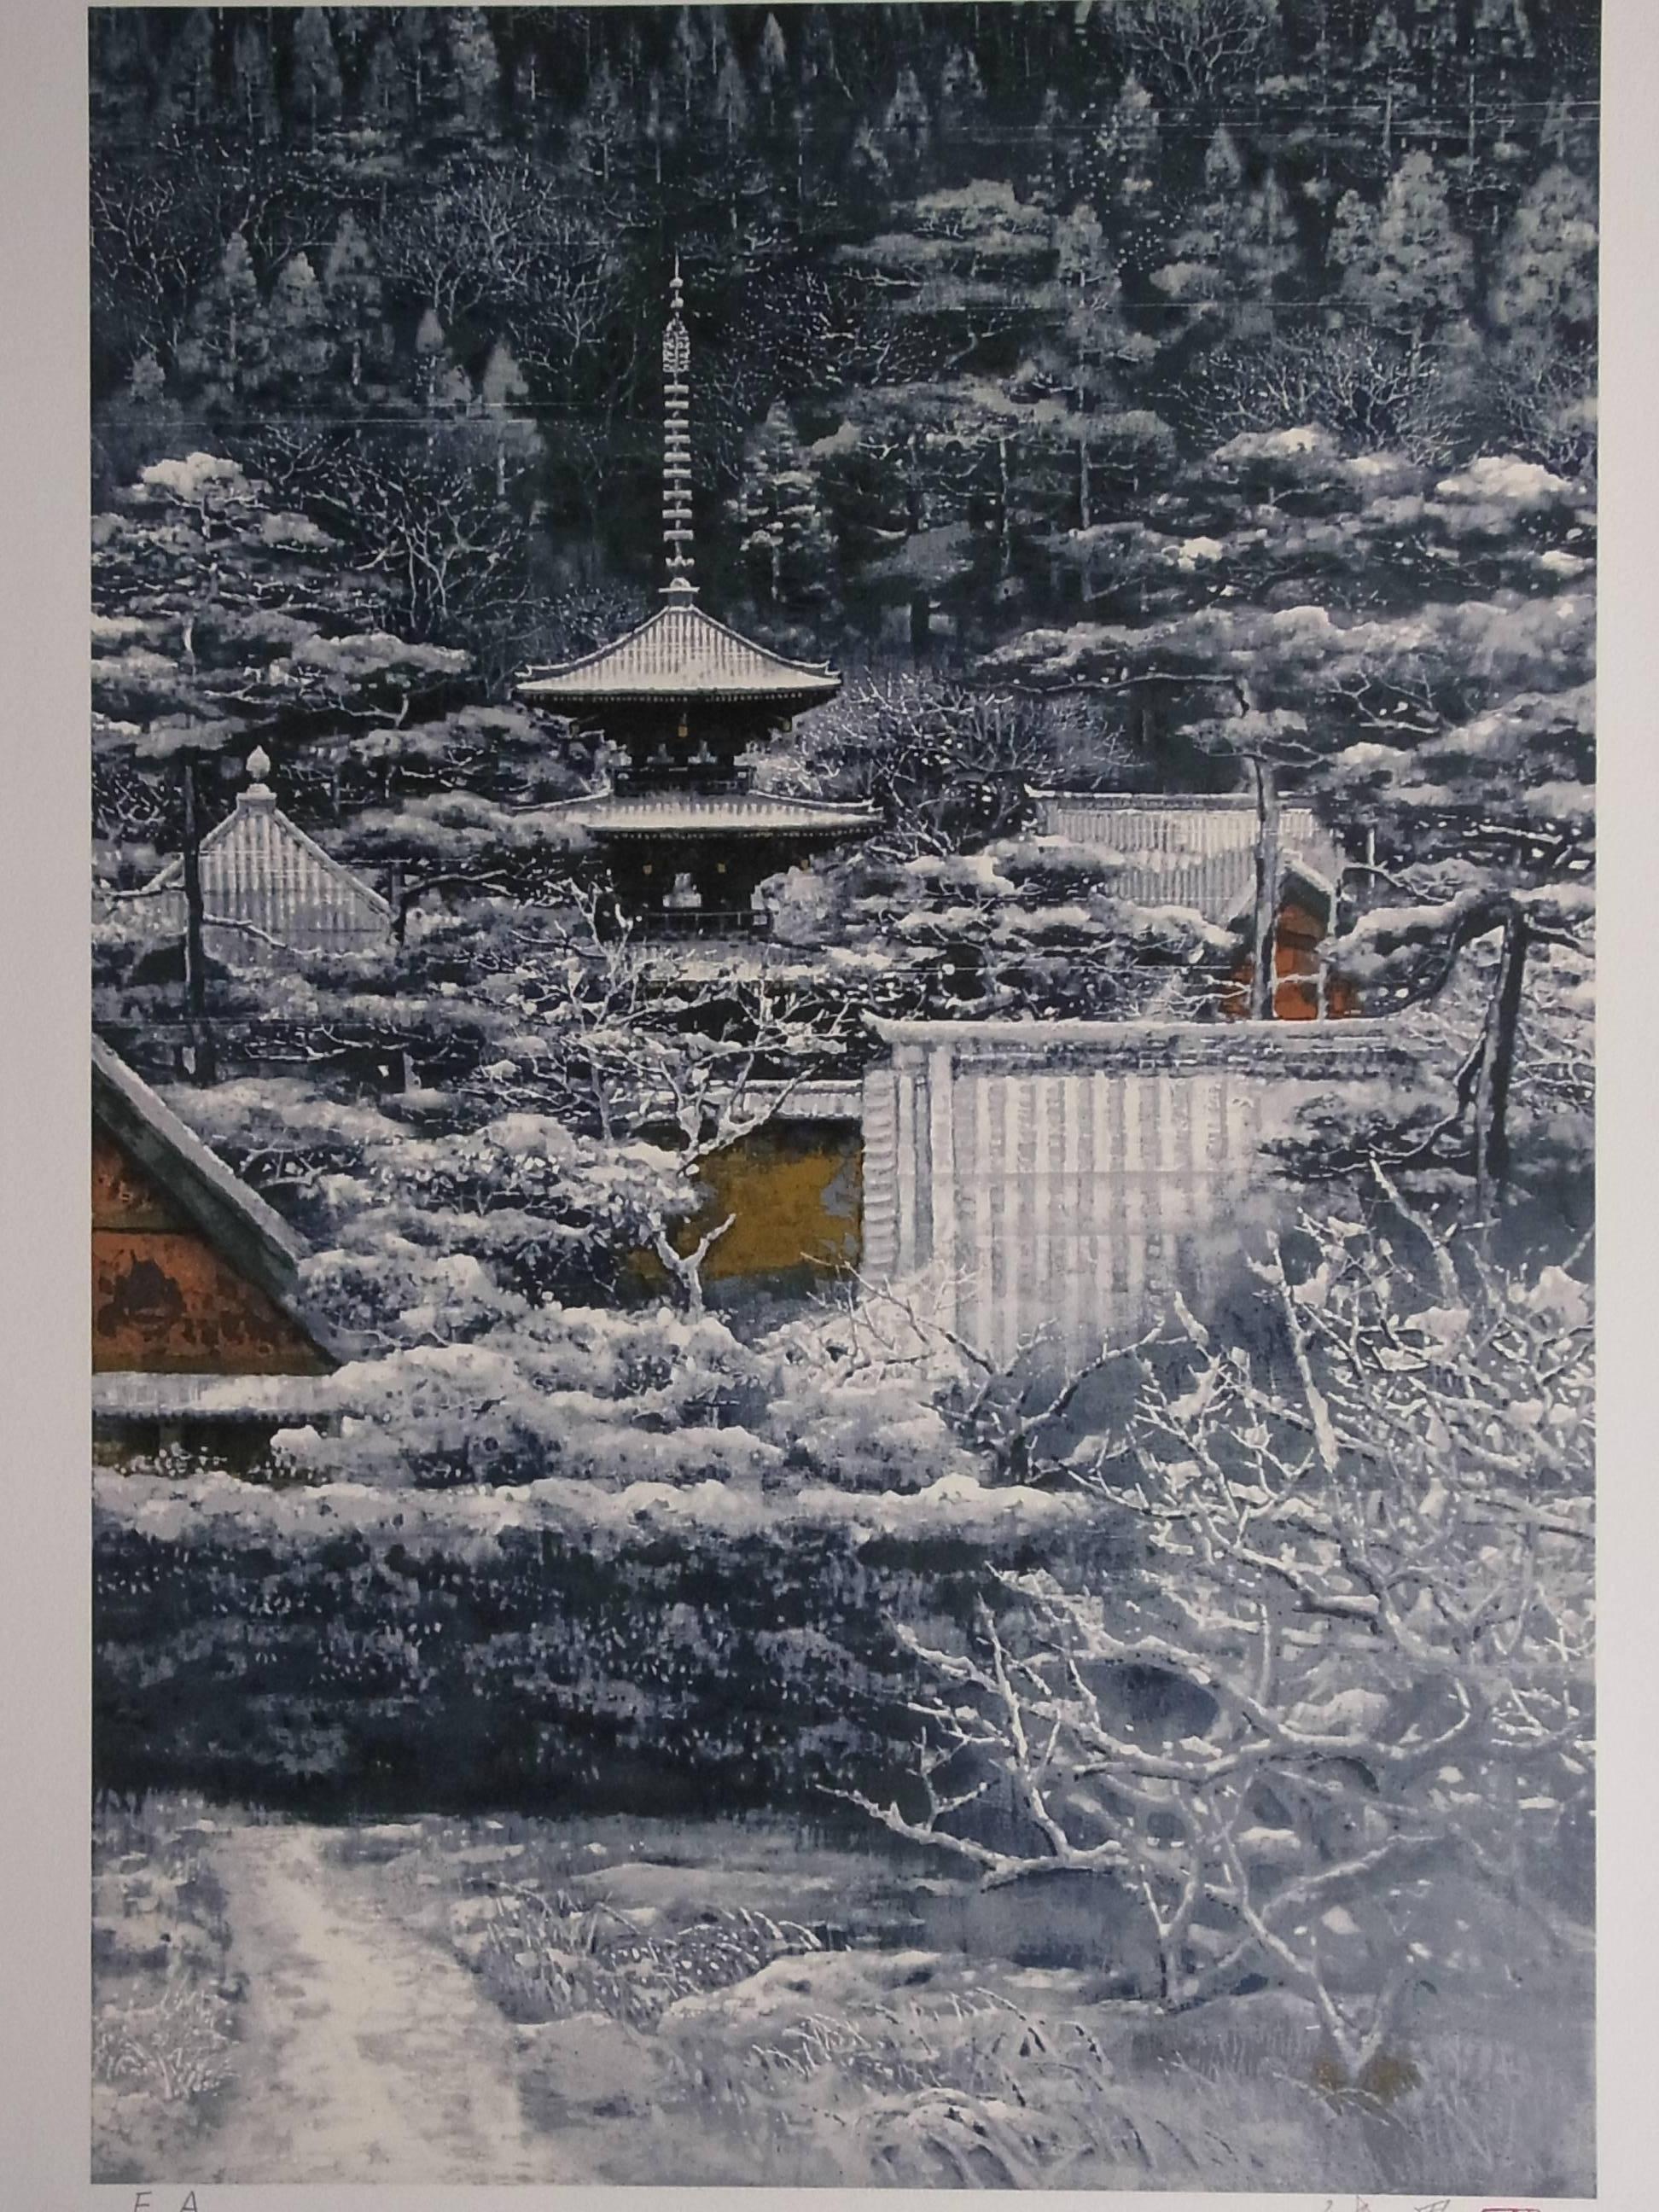 Color lithograph by Sumio Goto (1930-2016), Japanese painter
Temple in Nara in the snow,  circa 1997
Signed and stamped.
Not framed.
Excellent condition.

Biography:
1930 Born in a Shingon Temple in Chiba Prefecture.
1952 Awarded a prize at the 37th